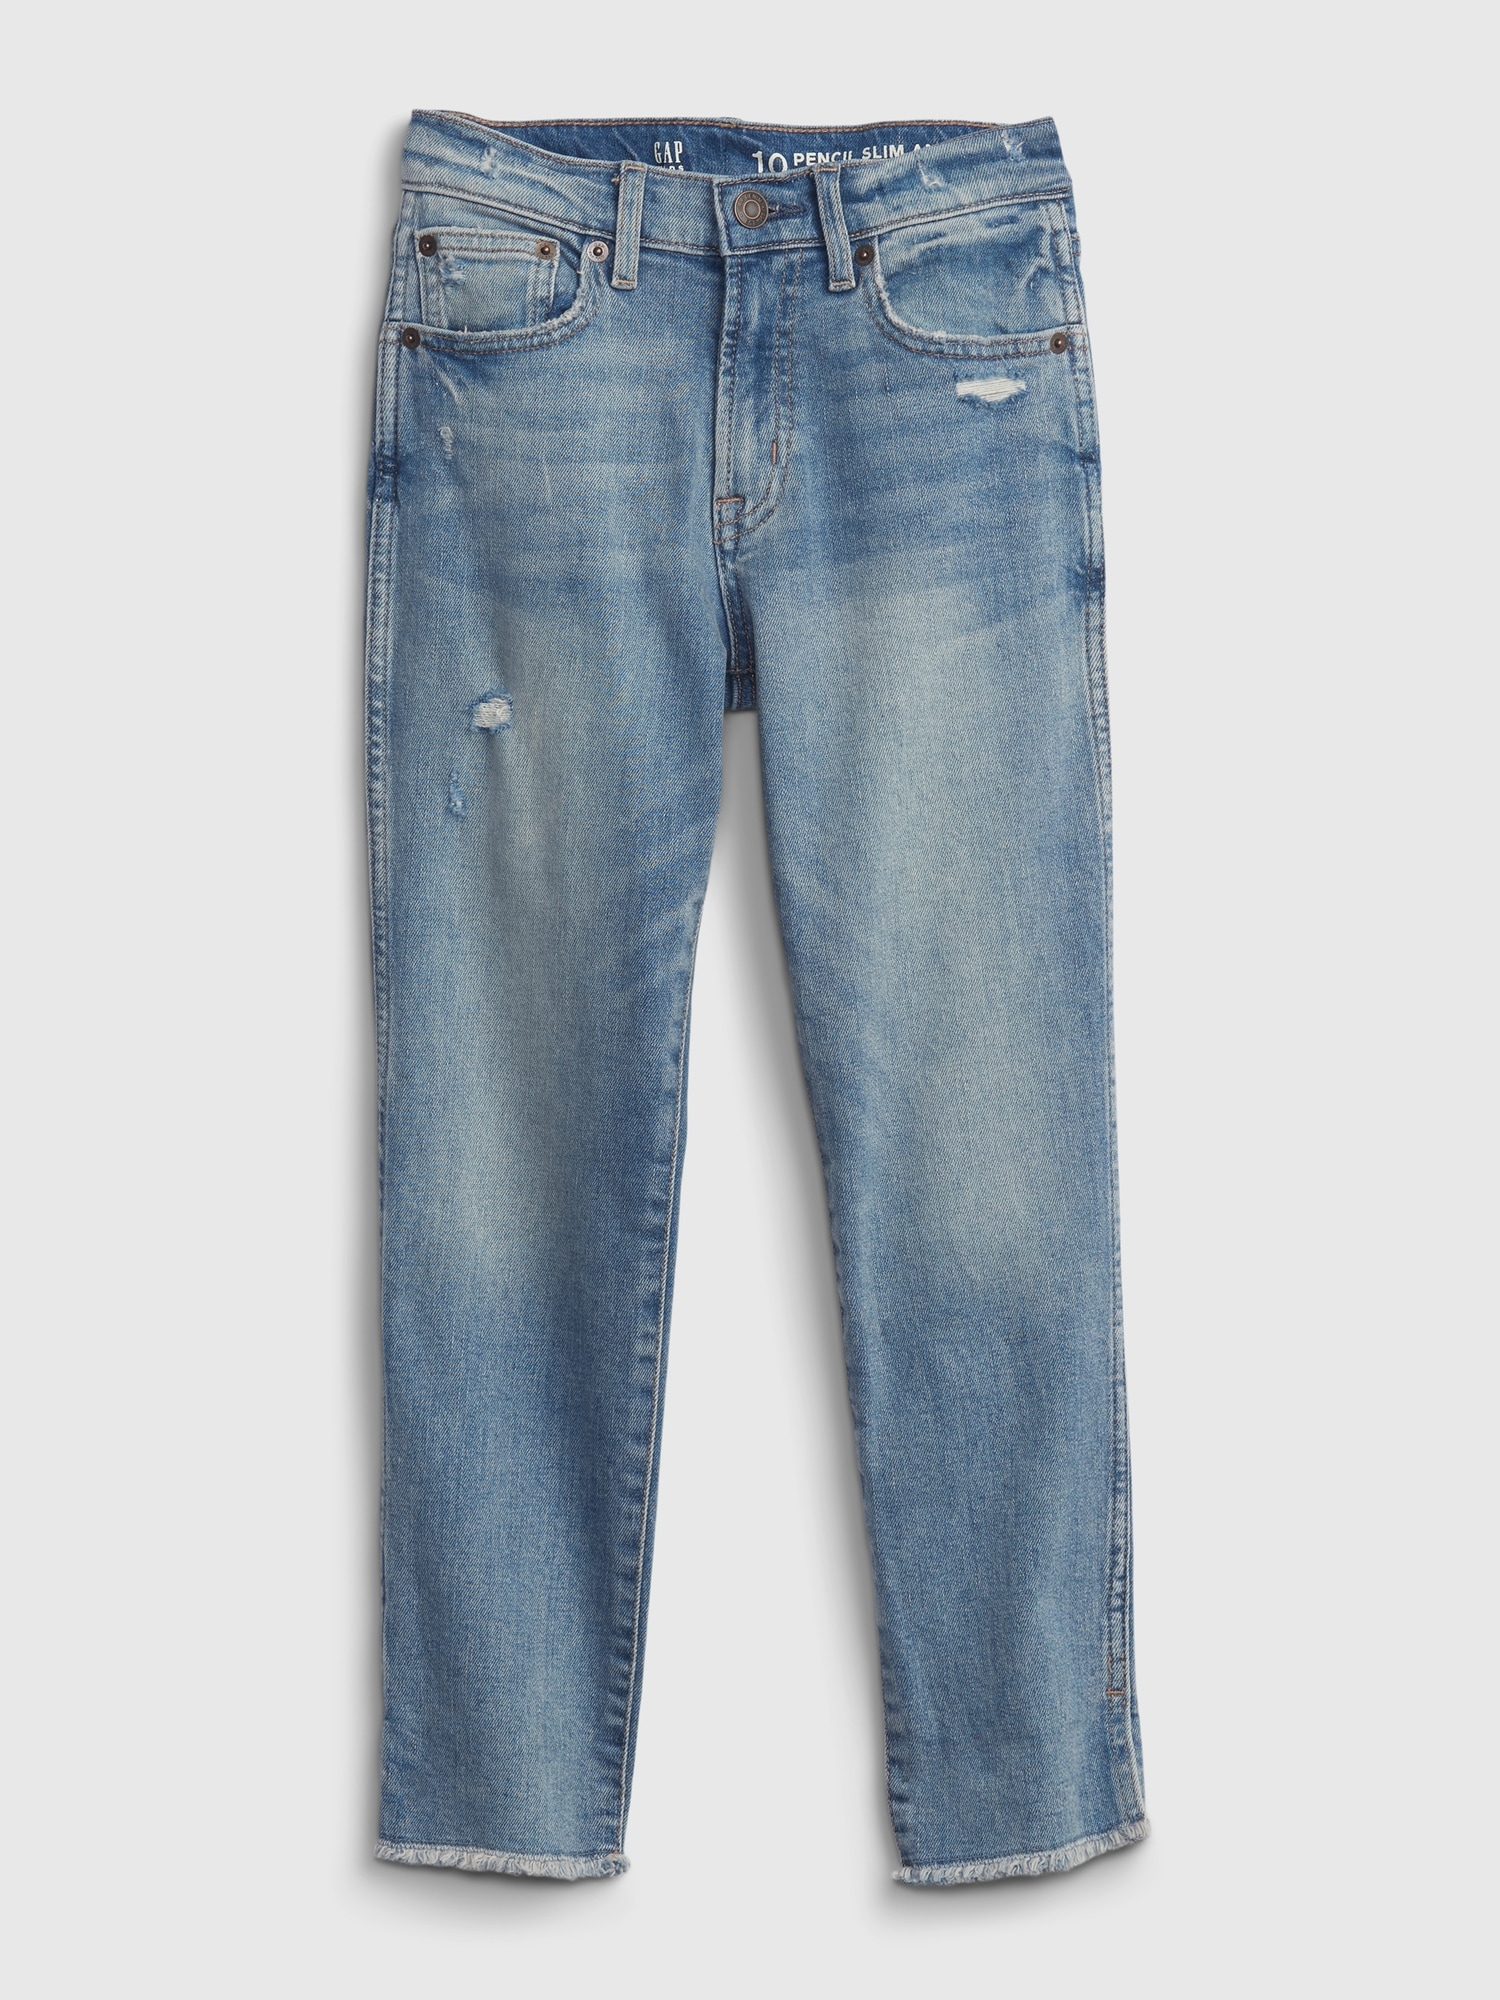 Kids High Rise Pencil Slim Ankle Jeans with Washwell | Gap